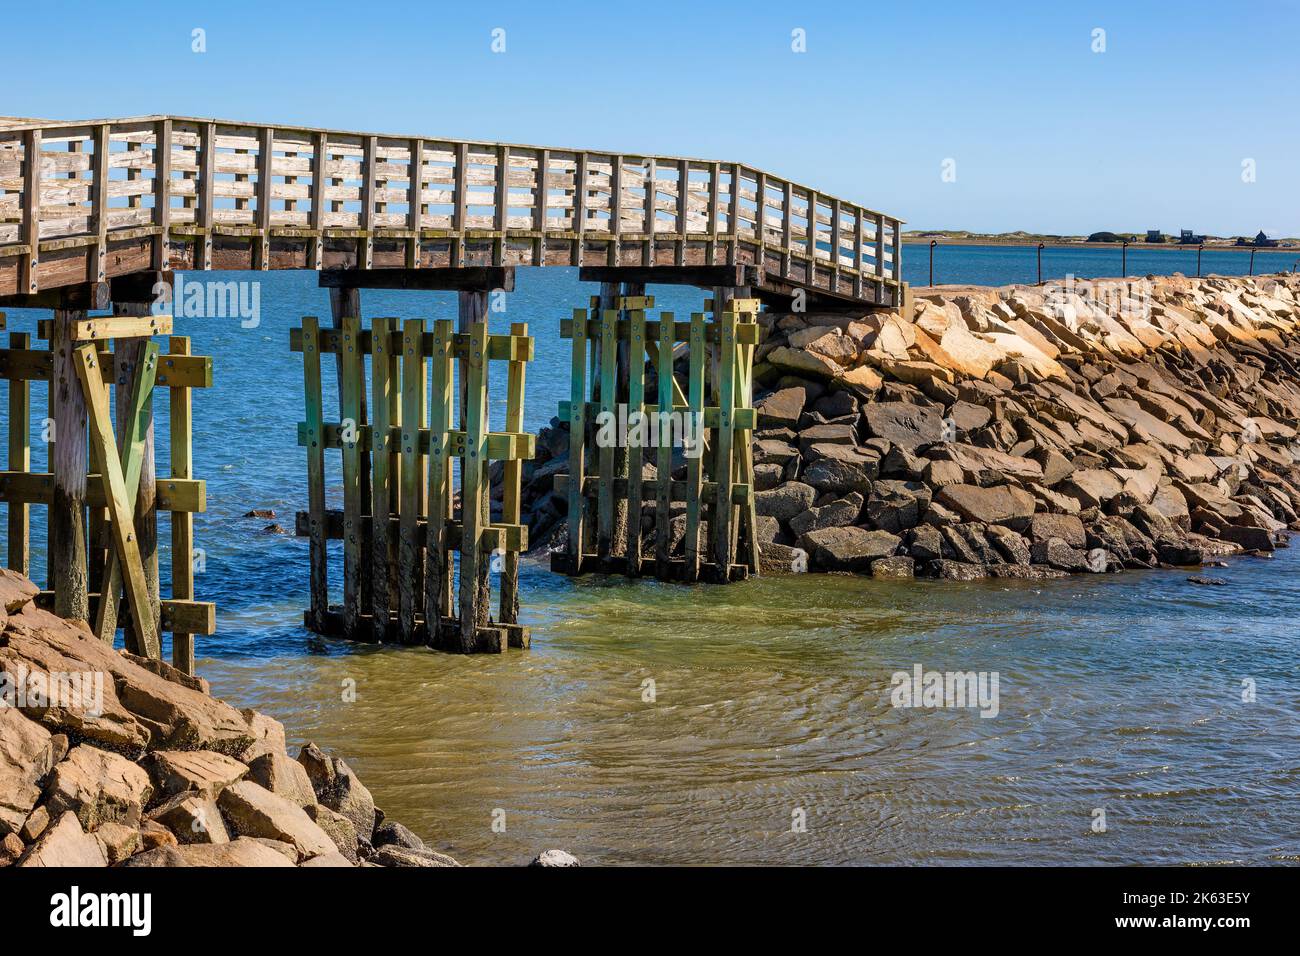 Bridge connecting the dike over seawater in Plymouth Harbor in Plymouth Massachusetts, USA. Stock Photo